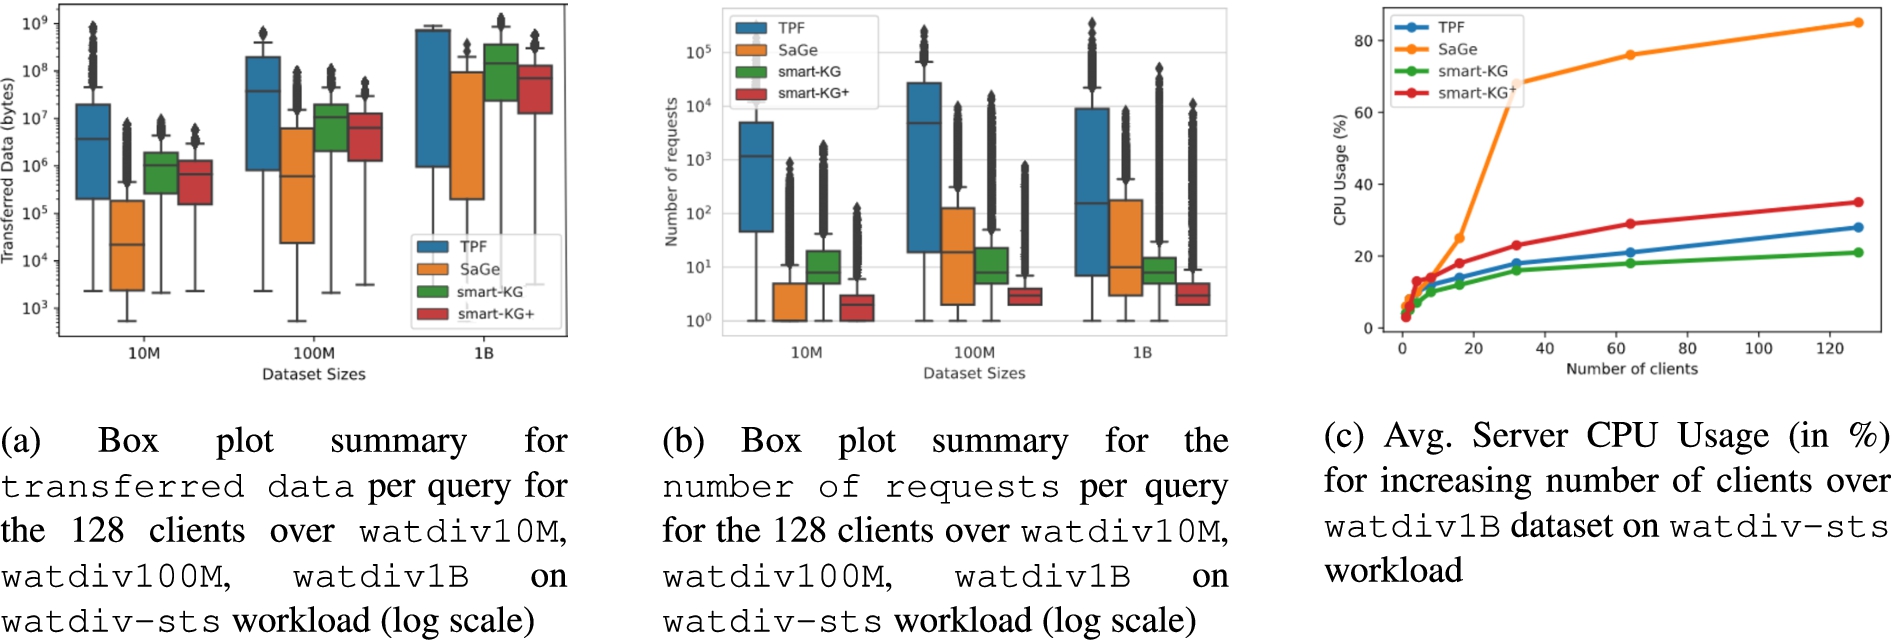 Server resource consumption with increasing number of clients and increasing dataset sizes on watdiv-sts workload.